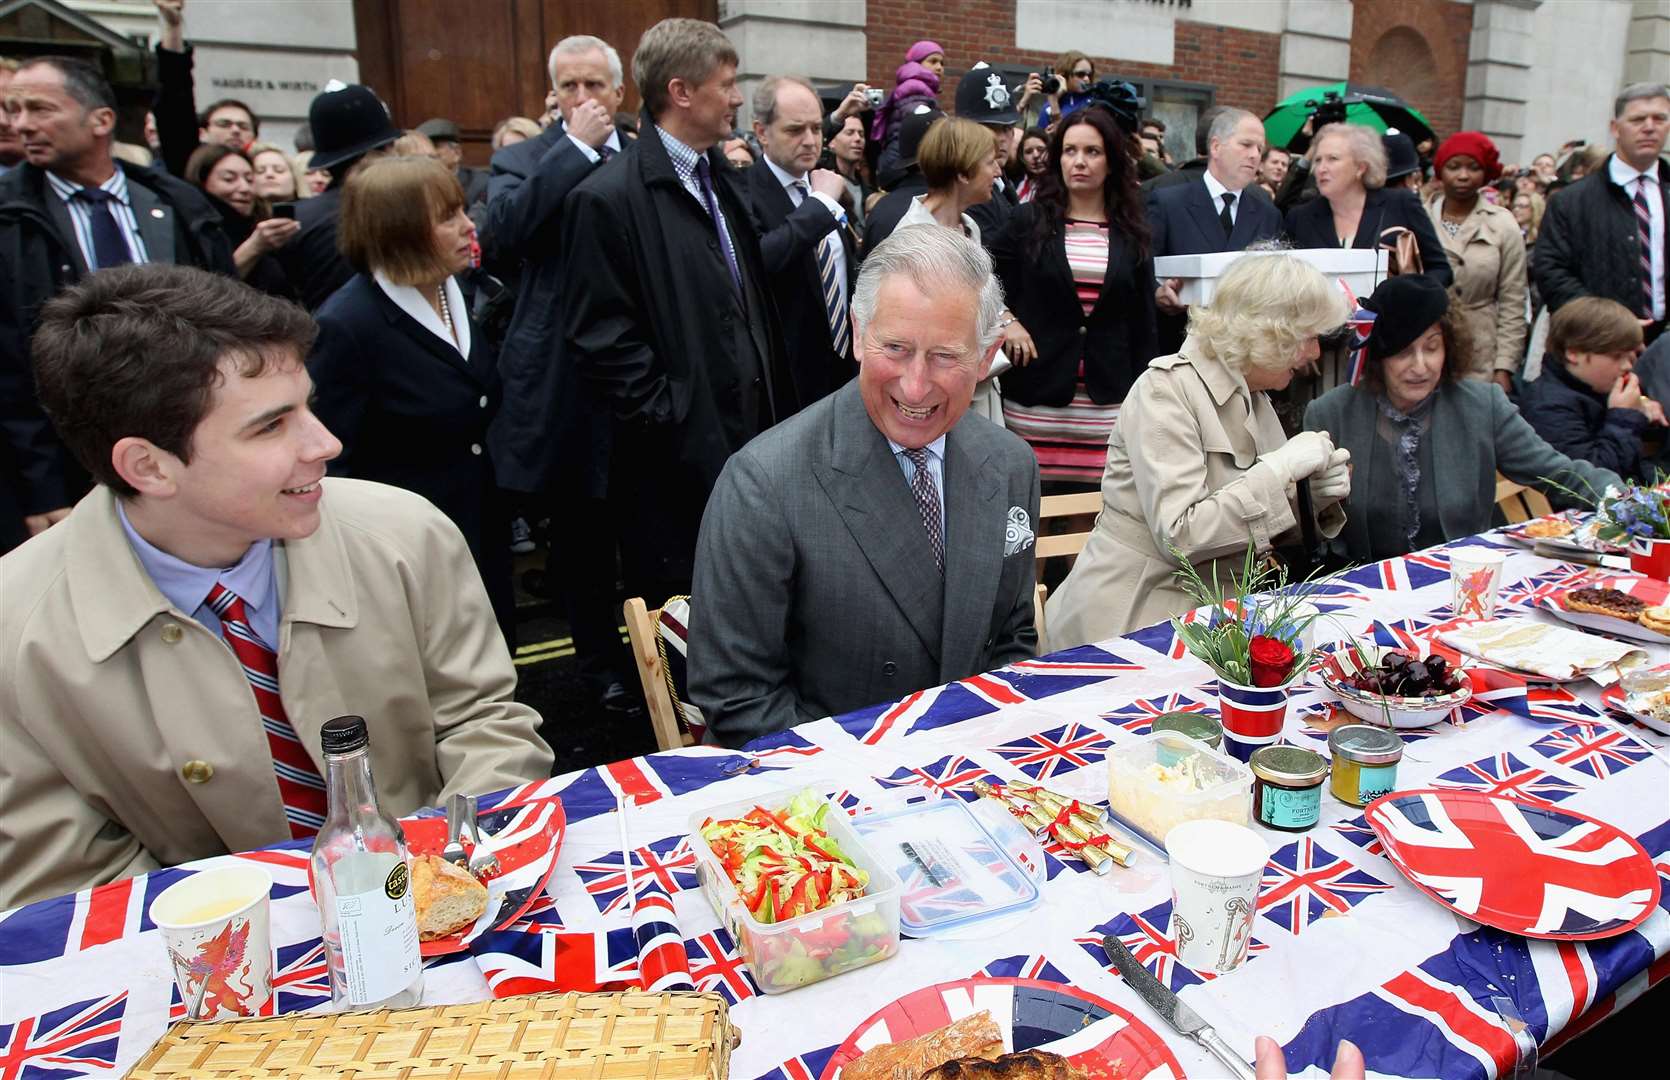 Charles and Camilla during a Big Jubilee Lunch in Piccadilly, London, in 2012 (Chris Jackson/PA)